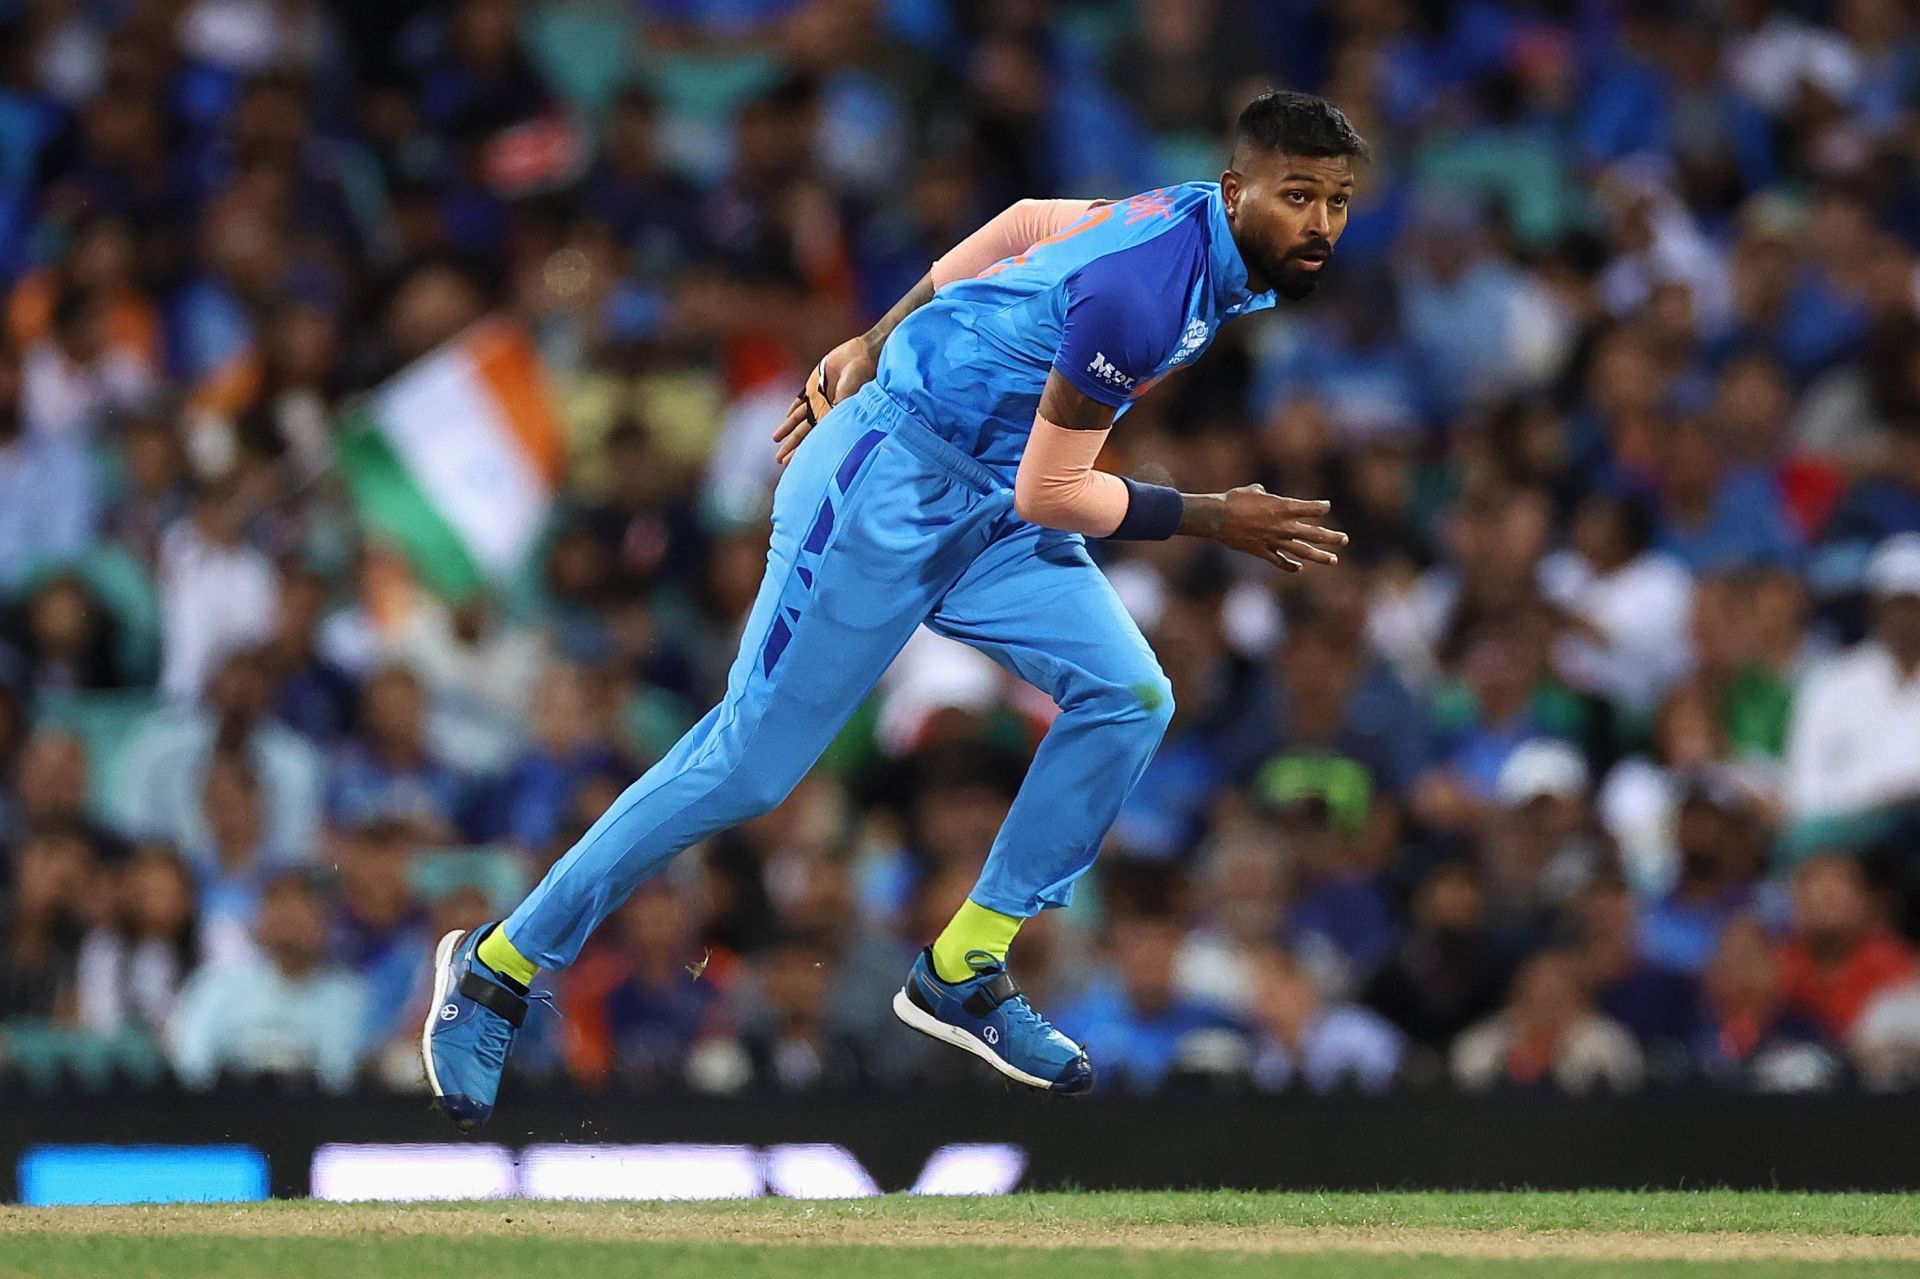 Hardik Pandya scalped two wickets in the 13th over of the Bangladesh innings.